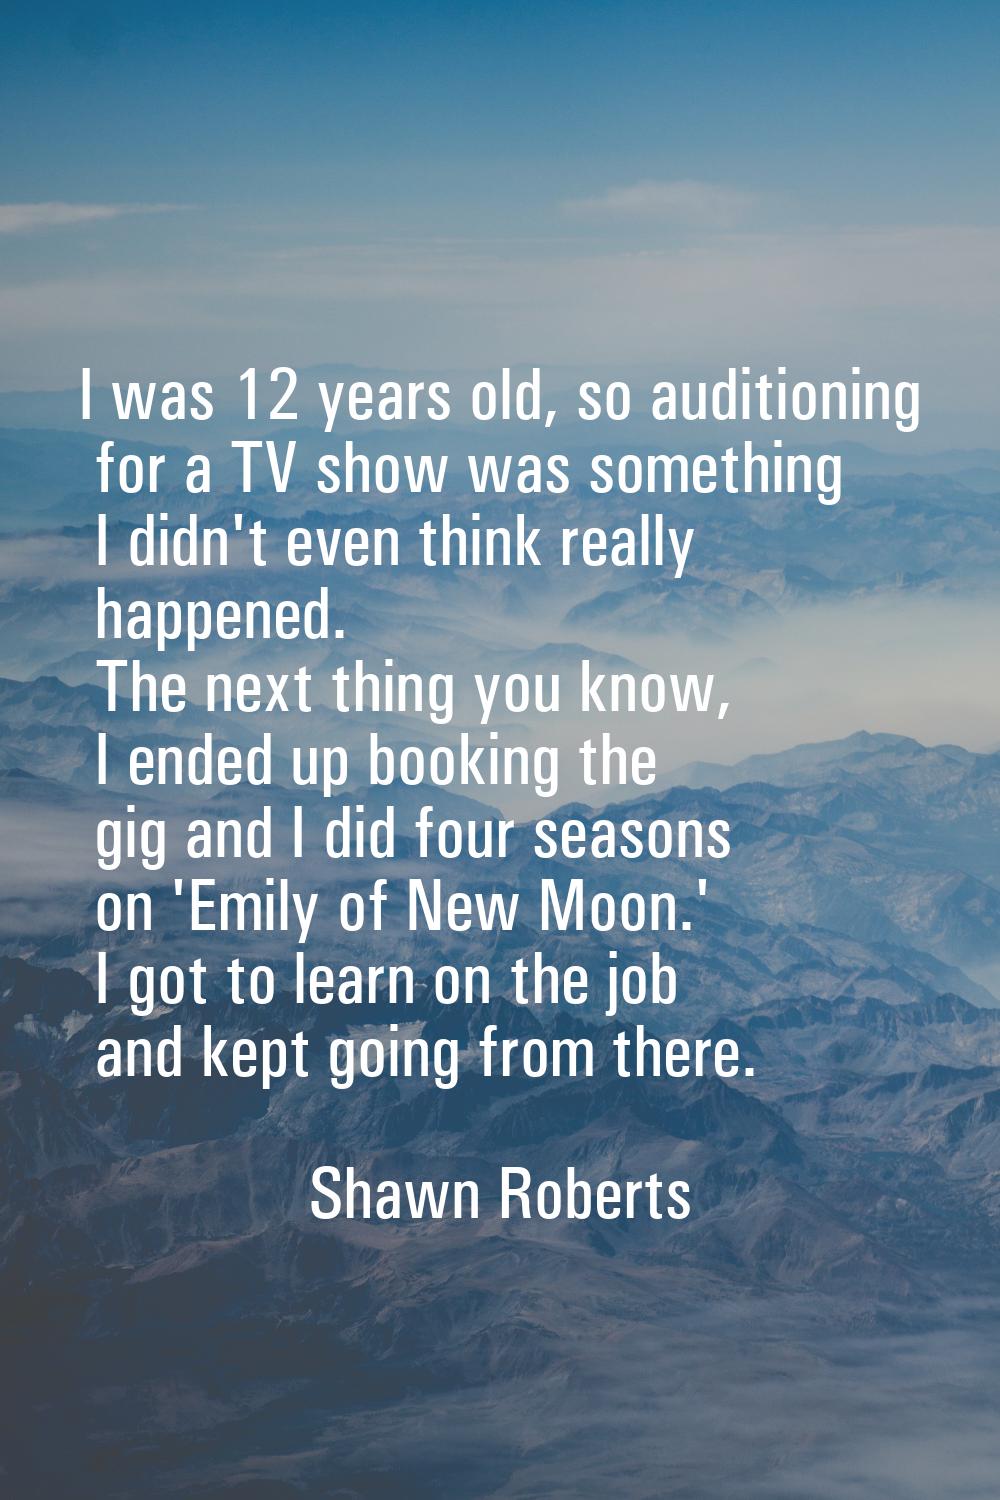 I was 12 years old, so auditioning for a TV show was something I didn't even think really happened.